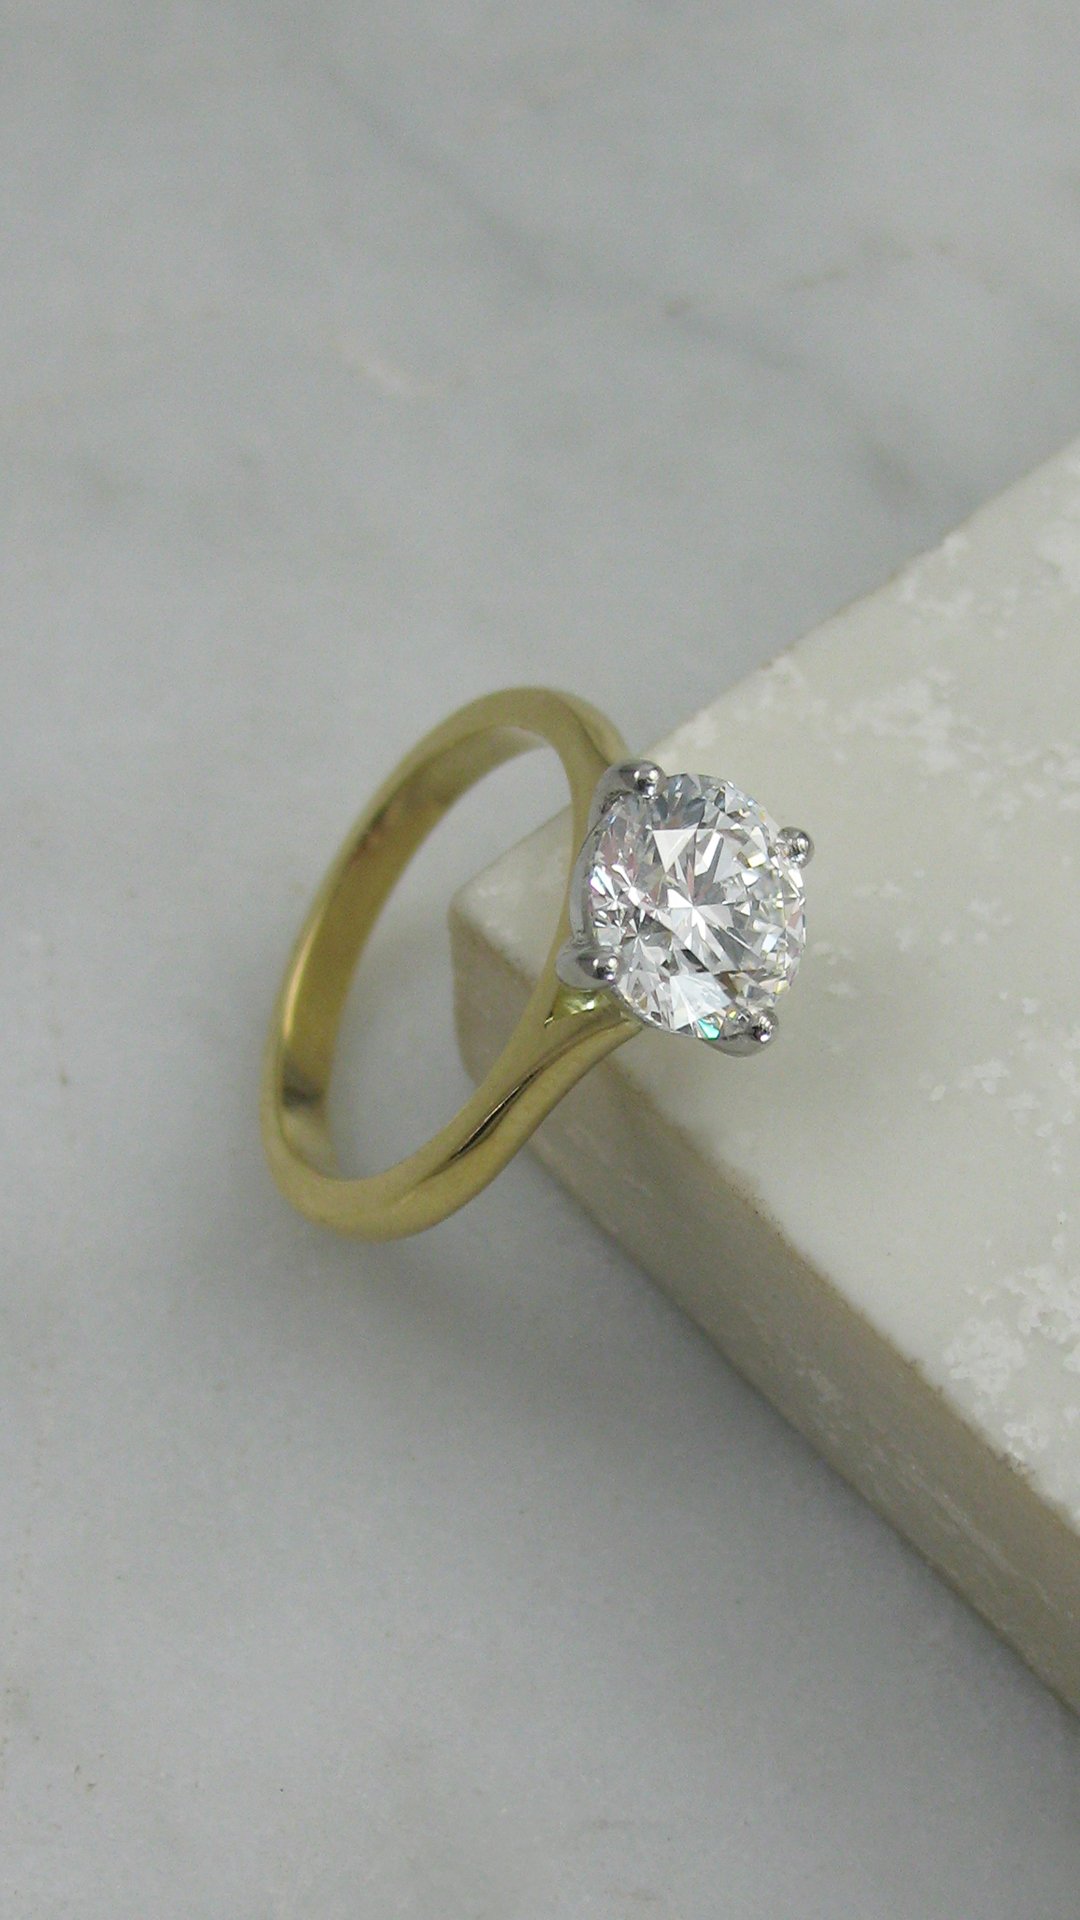 A beautiful solitaire diamond engagement ring